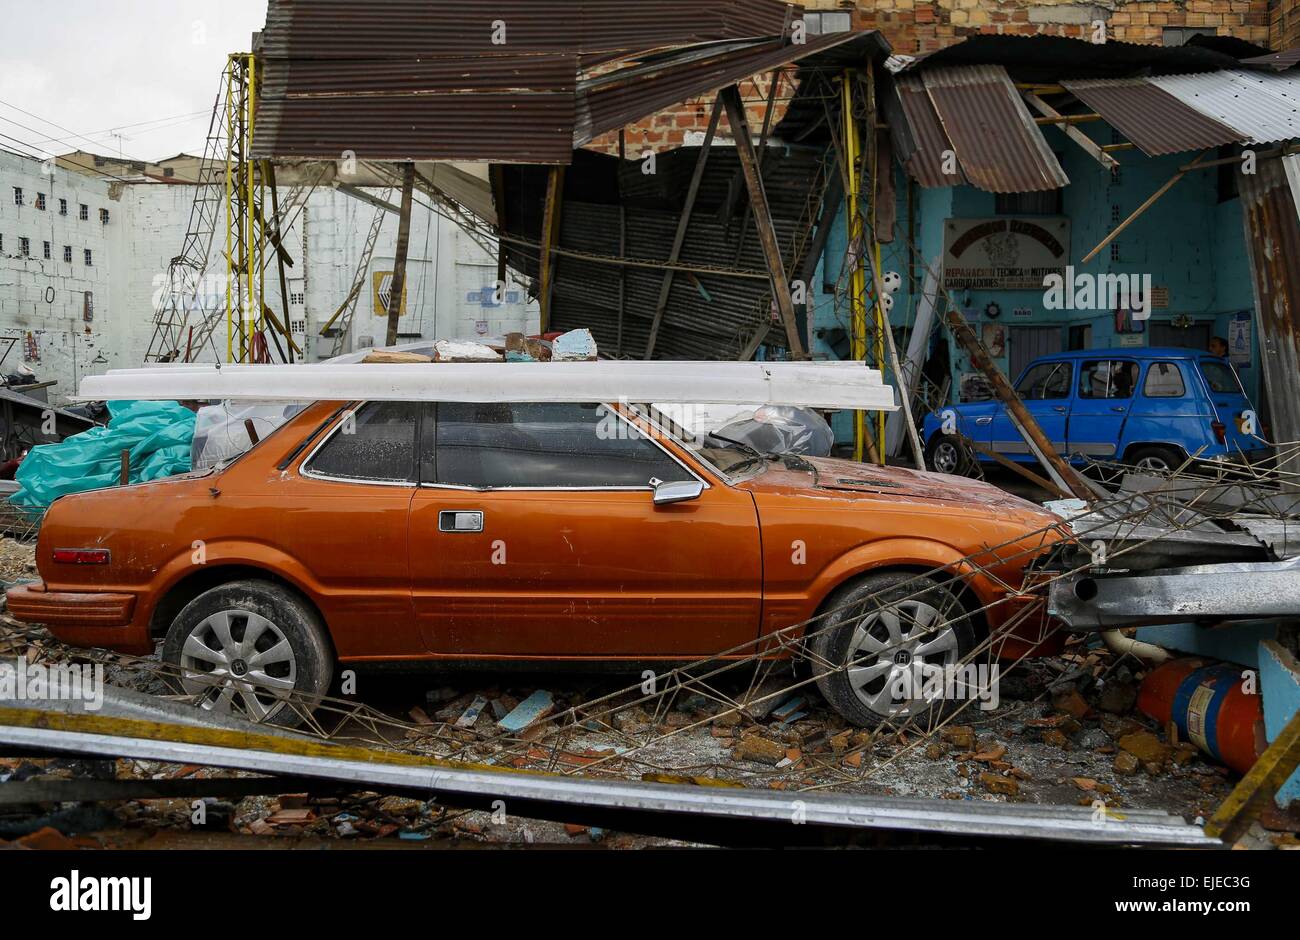 Bogota, Colombia. 24th Mar, 2015. Debris are seen in the city of Bogota, Colombia, on March 24, 2015. According to local press, several sectors of the Colombian capital city were affected by strong rain accompanied by hail on March 22, causing damage to hundreds of homes and generating floods. Credit:  Mauricio Alvarado/COLPRENSA/Xinhua/Alamy Live News Stock Photo